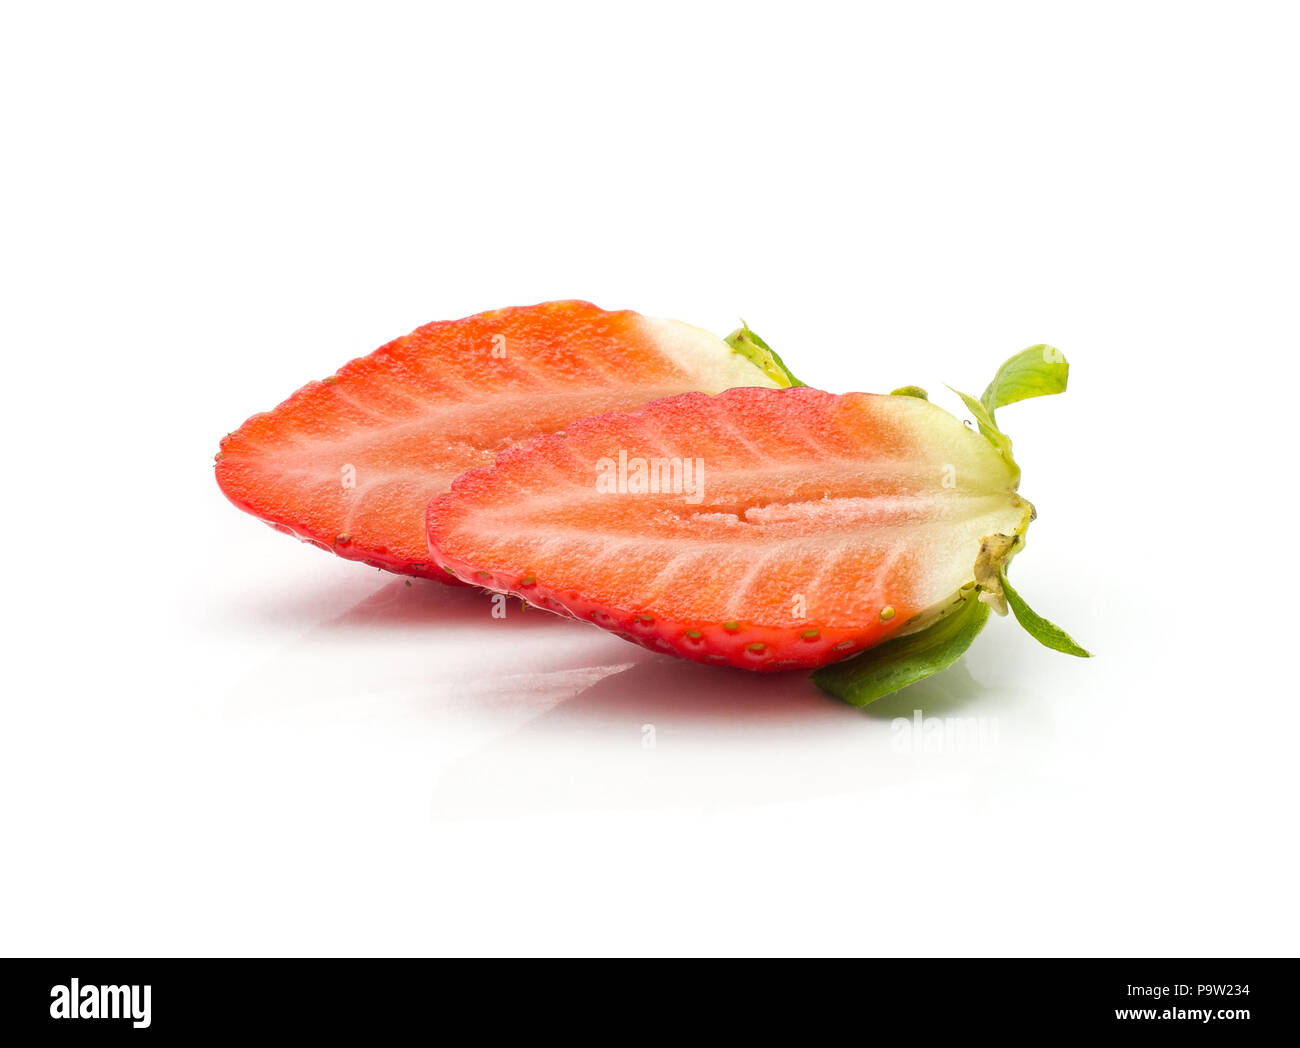 Sliced garden strawberry two halves isolated on white background Stock Photo